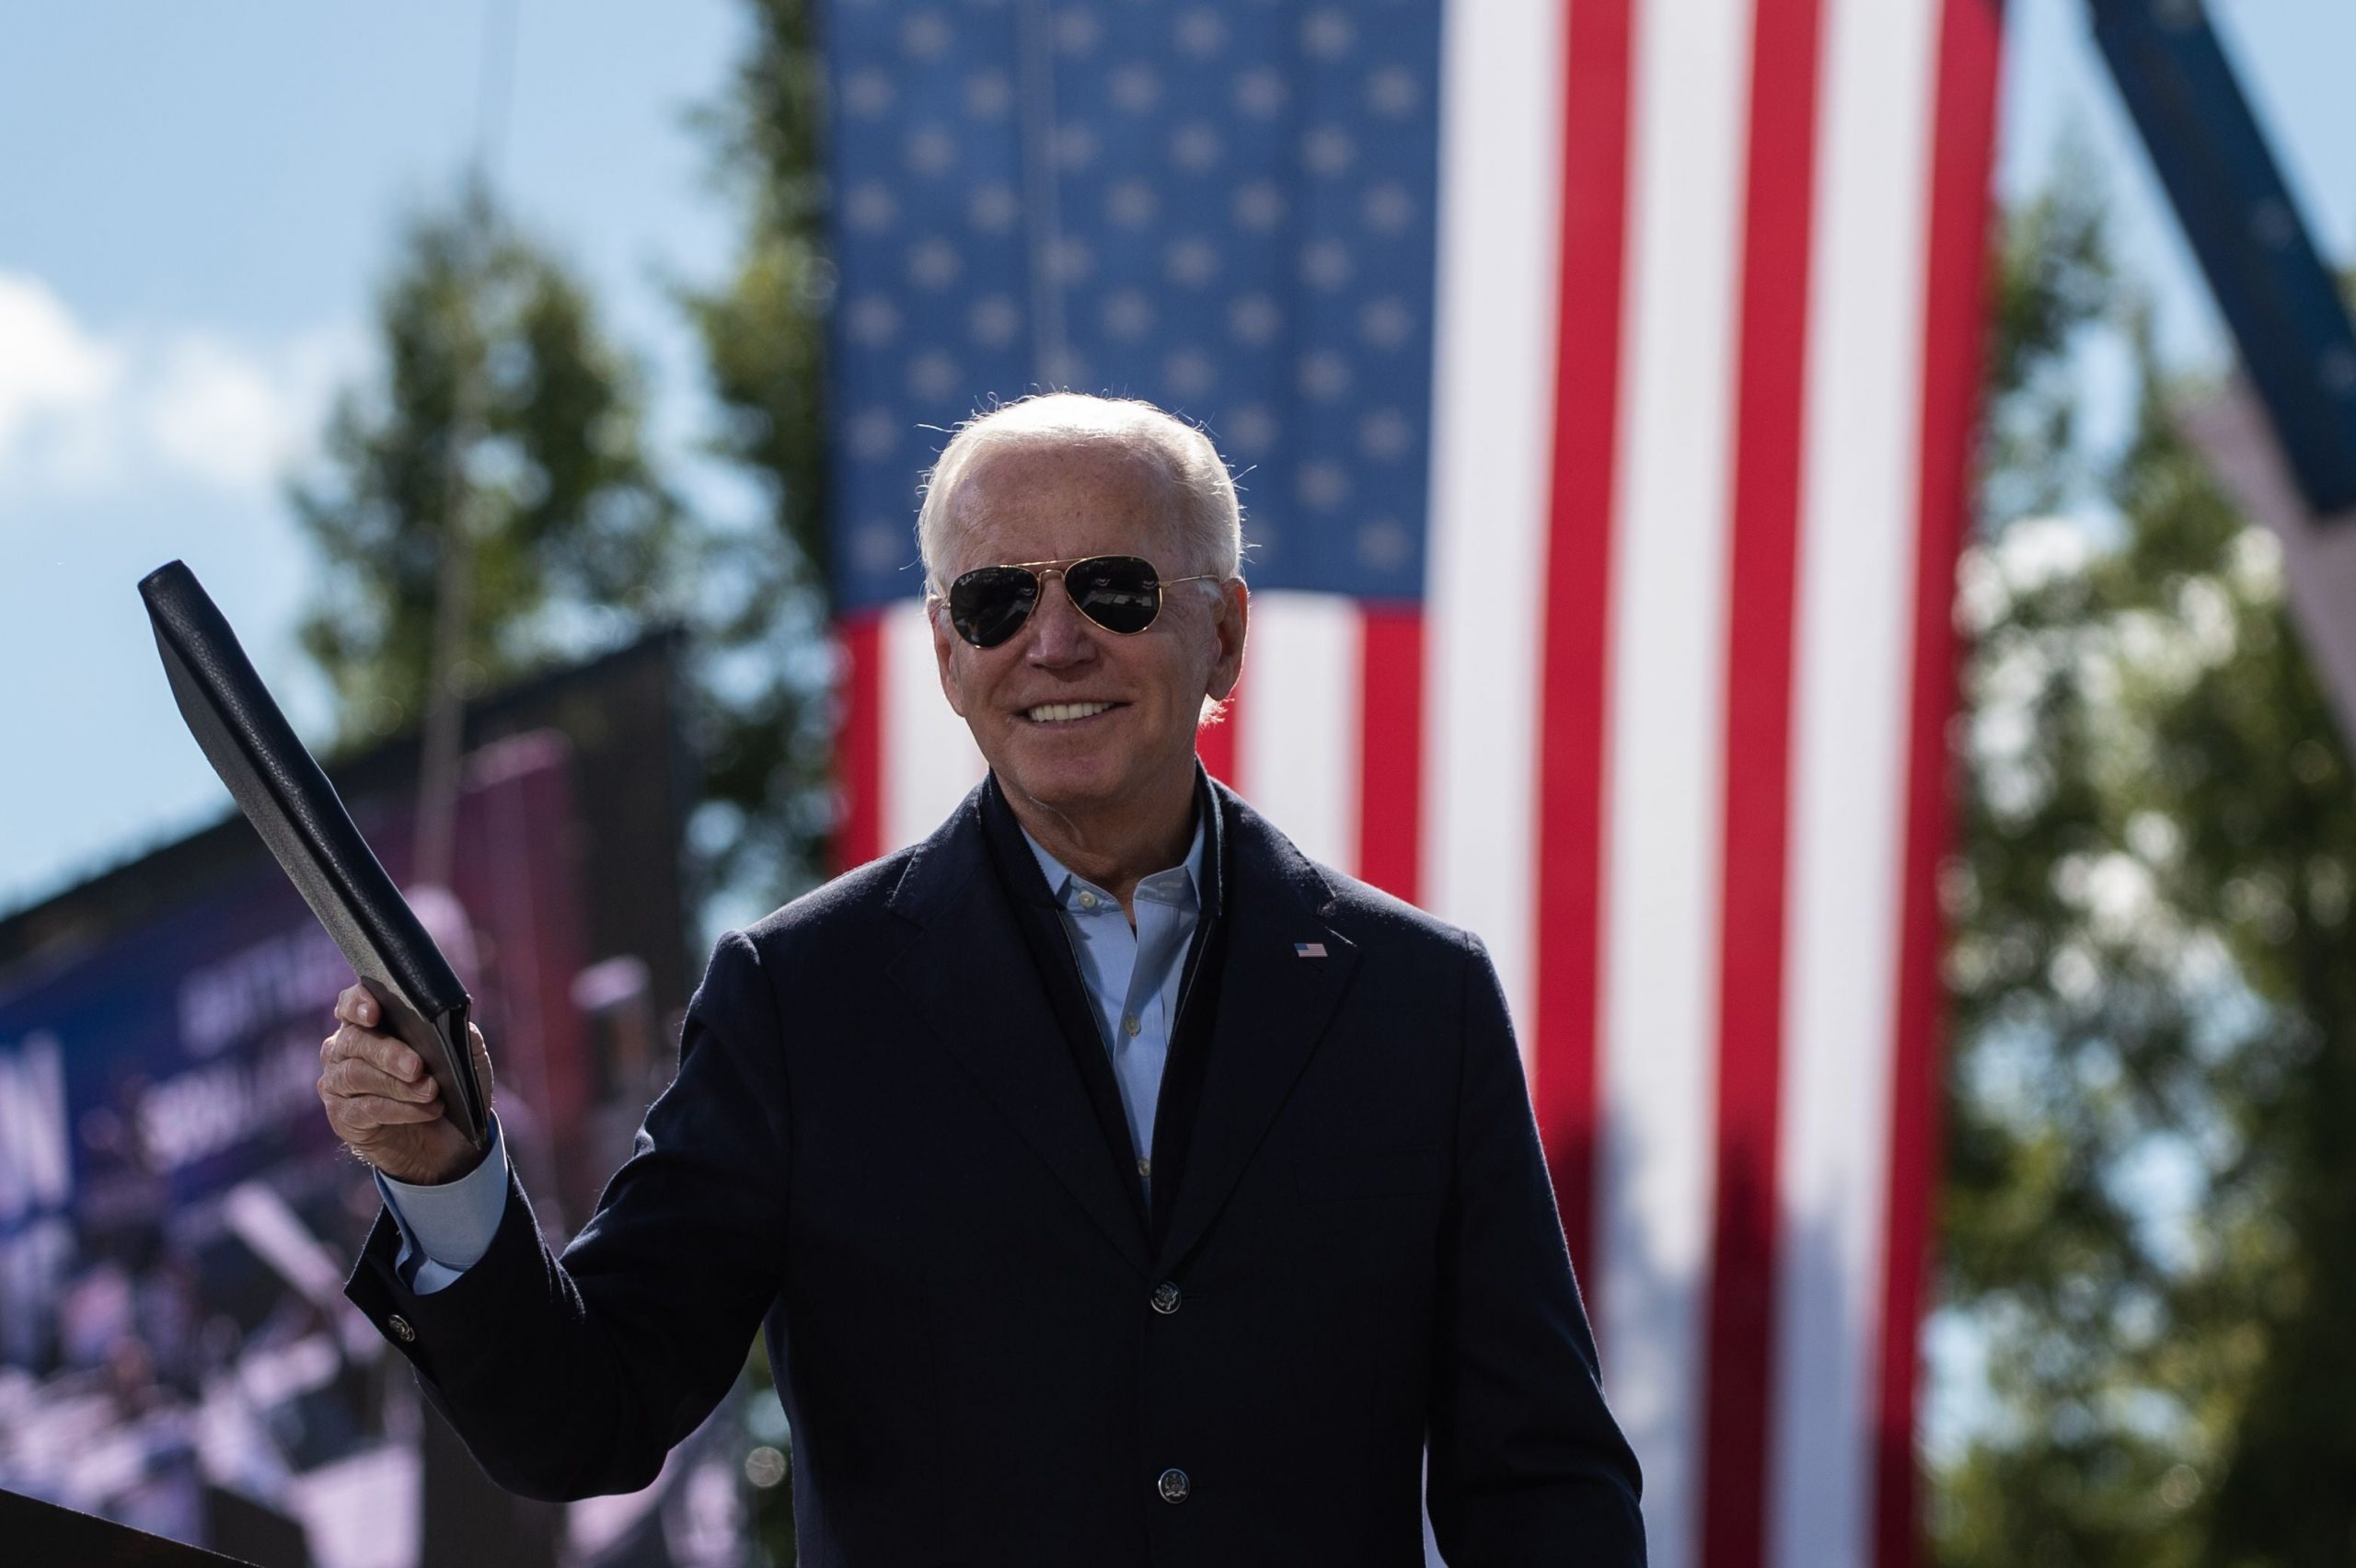 ‘He continues to lie to us’: Biden knocks Trump on the Coronavirus on the emerging battlefield in North Carolina